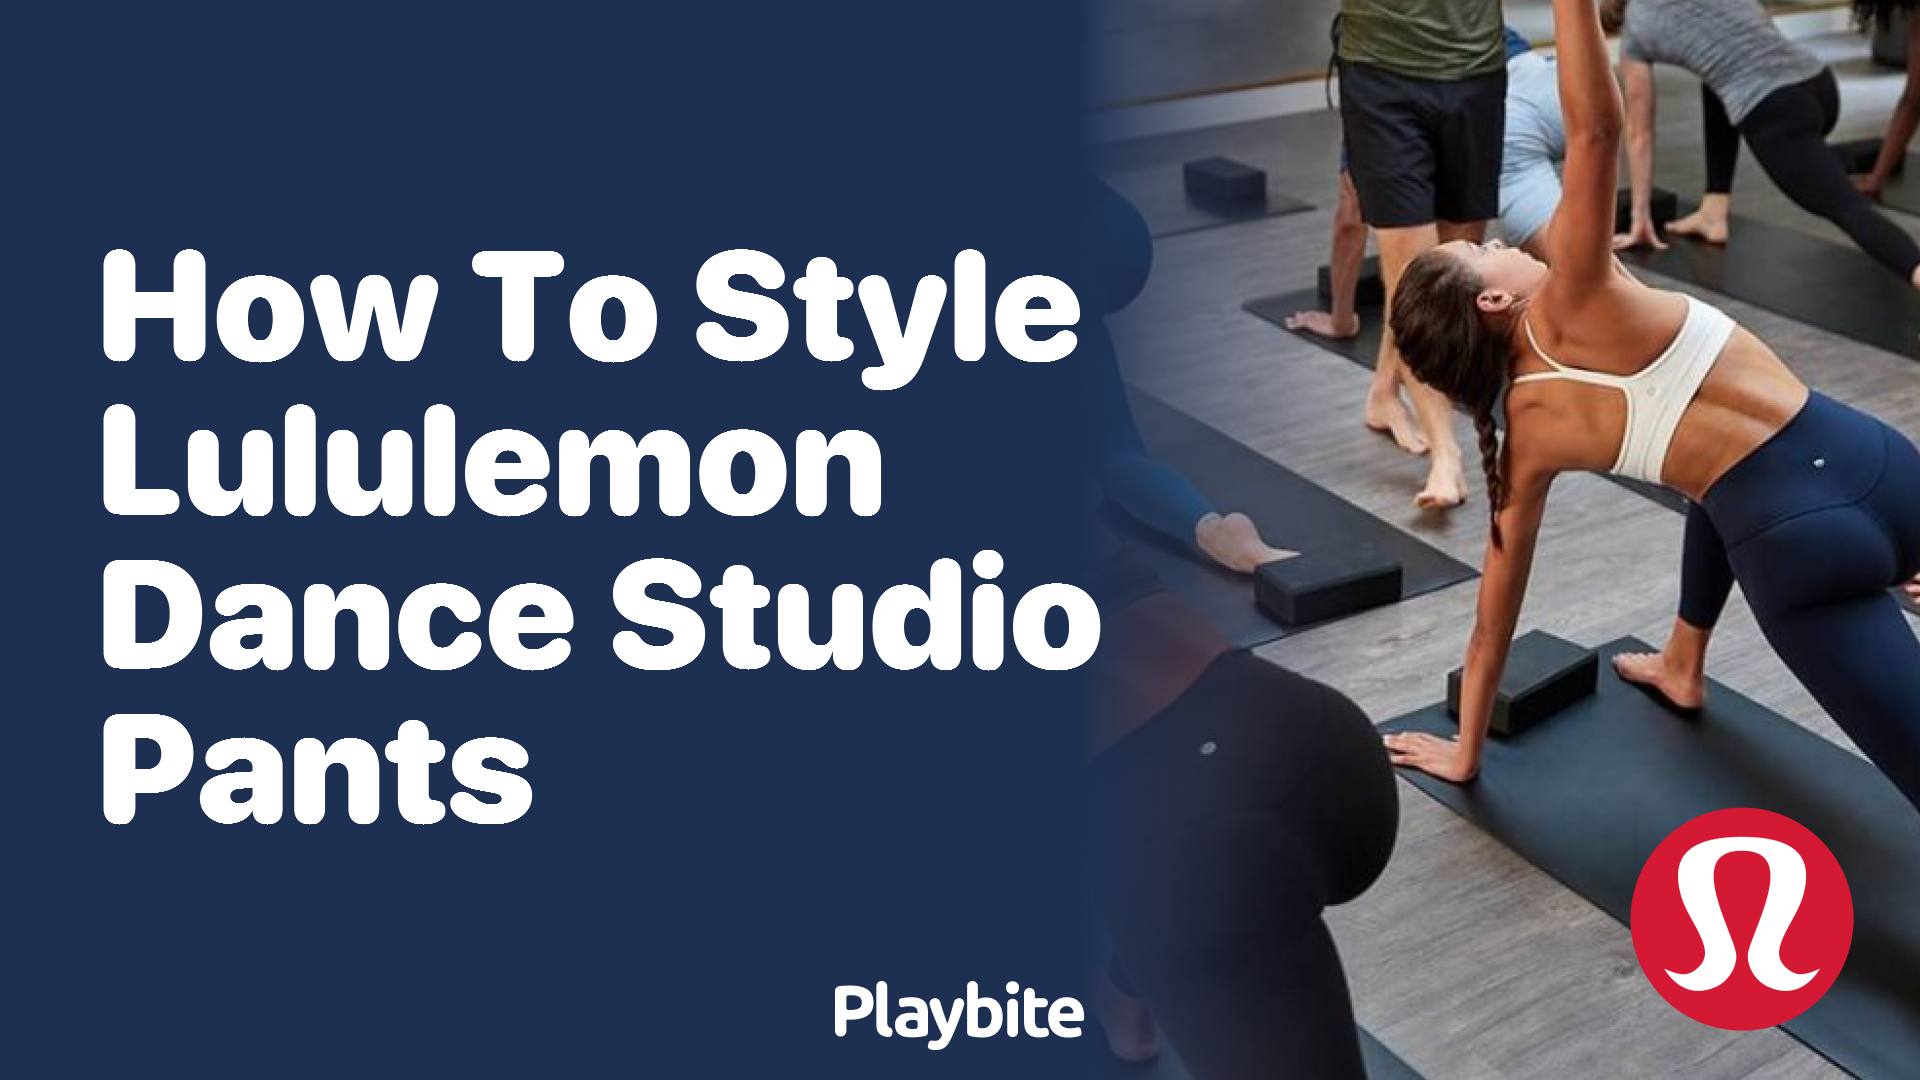 How to Style Lululemon Dance Studio Pants for Any Occasion? - Playbite